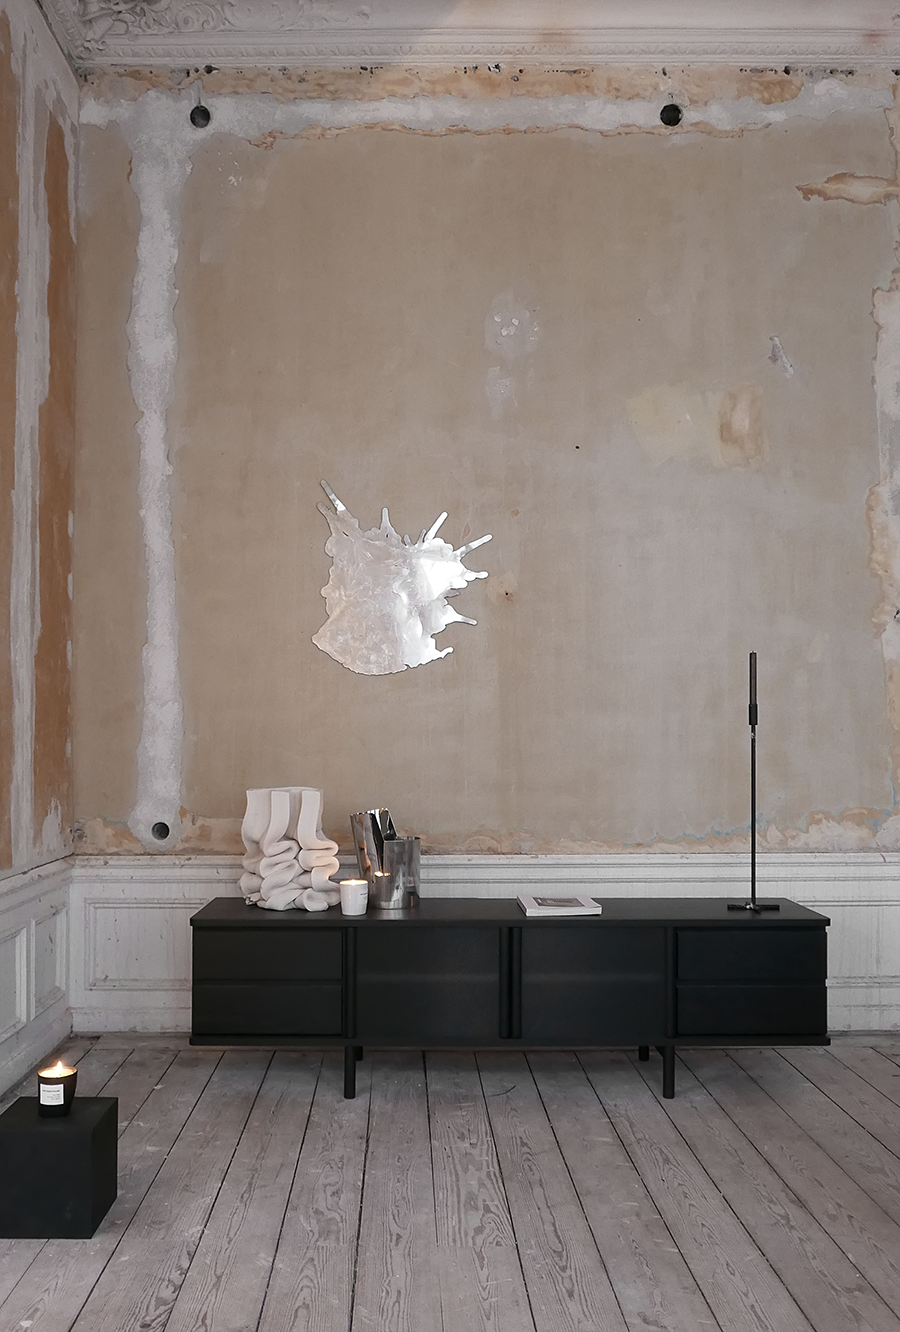 ARIAKE COLLECTION IN STOCKHOLM // A QUIET REFLECTION